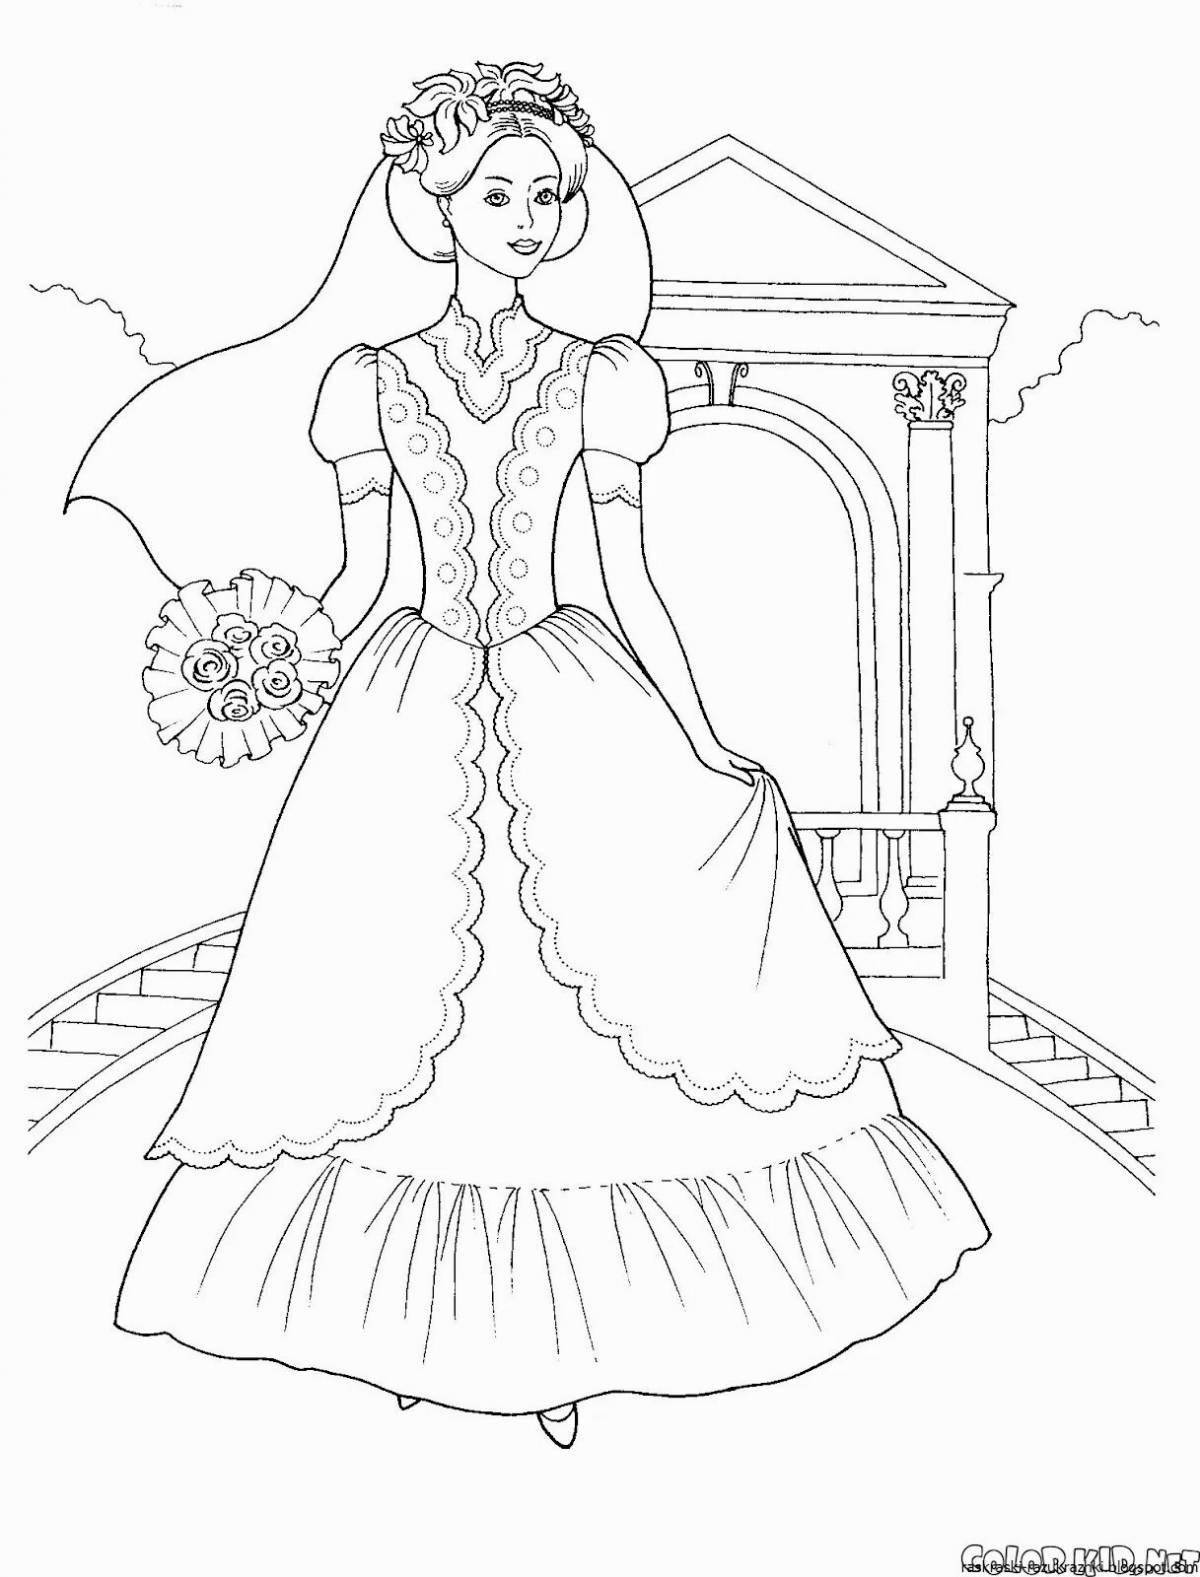 Luxury coloring book for girls princesses in beautiful dresses